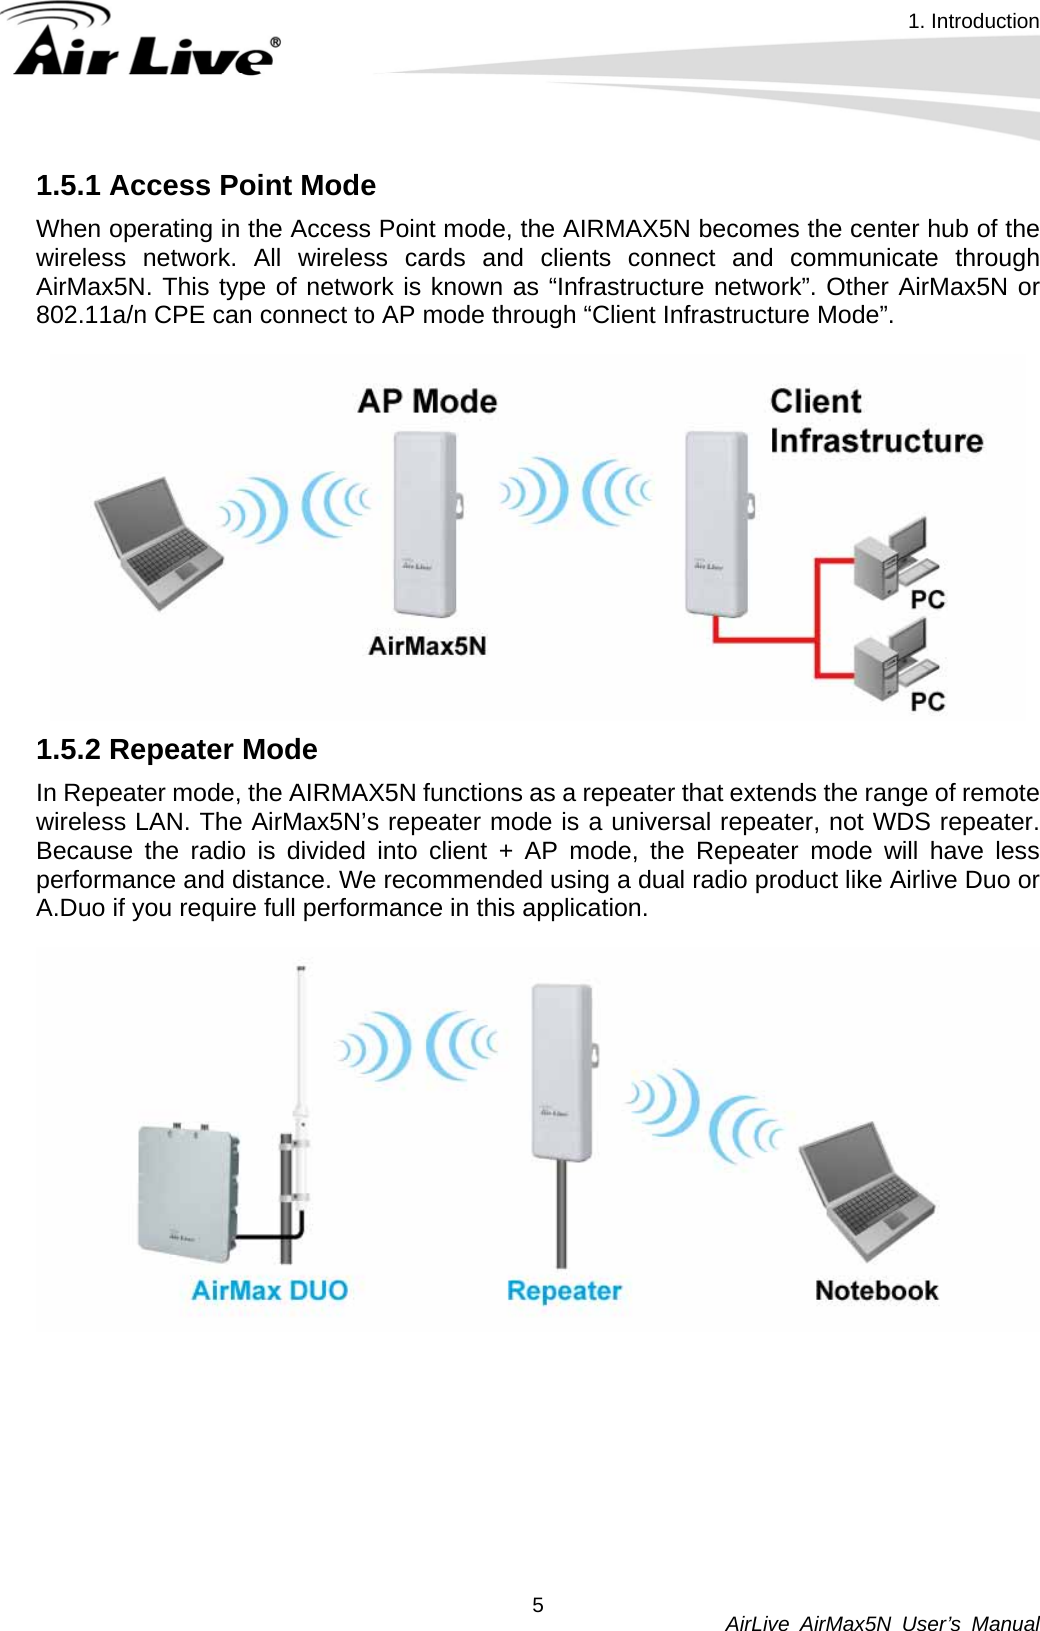 1. Introduction          AirLive AirMax5N User’s Manual 51.5.1 Access Point Mode When operating in the Access Point mode, the AIRMAX5N becomes the center hub of the wireless network. All wireless cards and clients connect and communicate through AirMax5N. This type of network is known as “Infrastructure network”. Other AirMax5N or 802.11a/n CPE can connect to AP mode through “Client Infrastructure Mode”.   1.5.2 Repeater Mode In Repeater mode, the AIRMAX5N functions as a repeater that extends the range of remote wireless LAN. The AirMax5N’s repeater mode is a universal repeater, not WDS repeater. Because the radio is divided into client + AP mode, the Repeater mode will have less performance and distance. We recommended using a dual radio product like Airlive Duo or A.Duo if you require full performance in this application.            